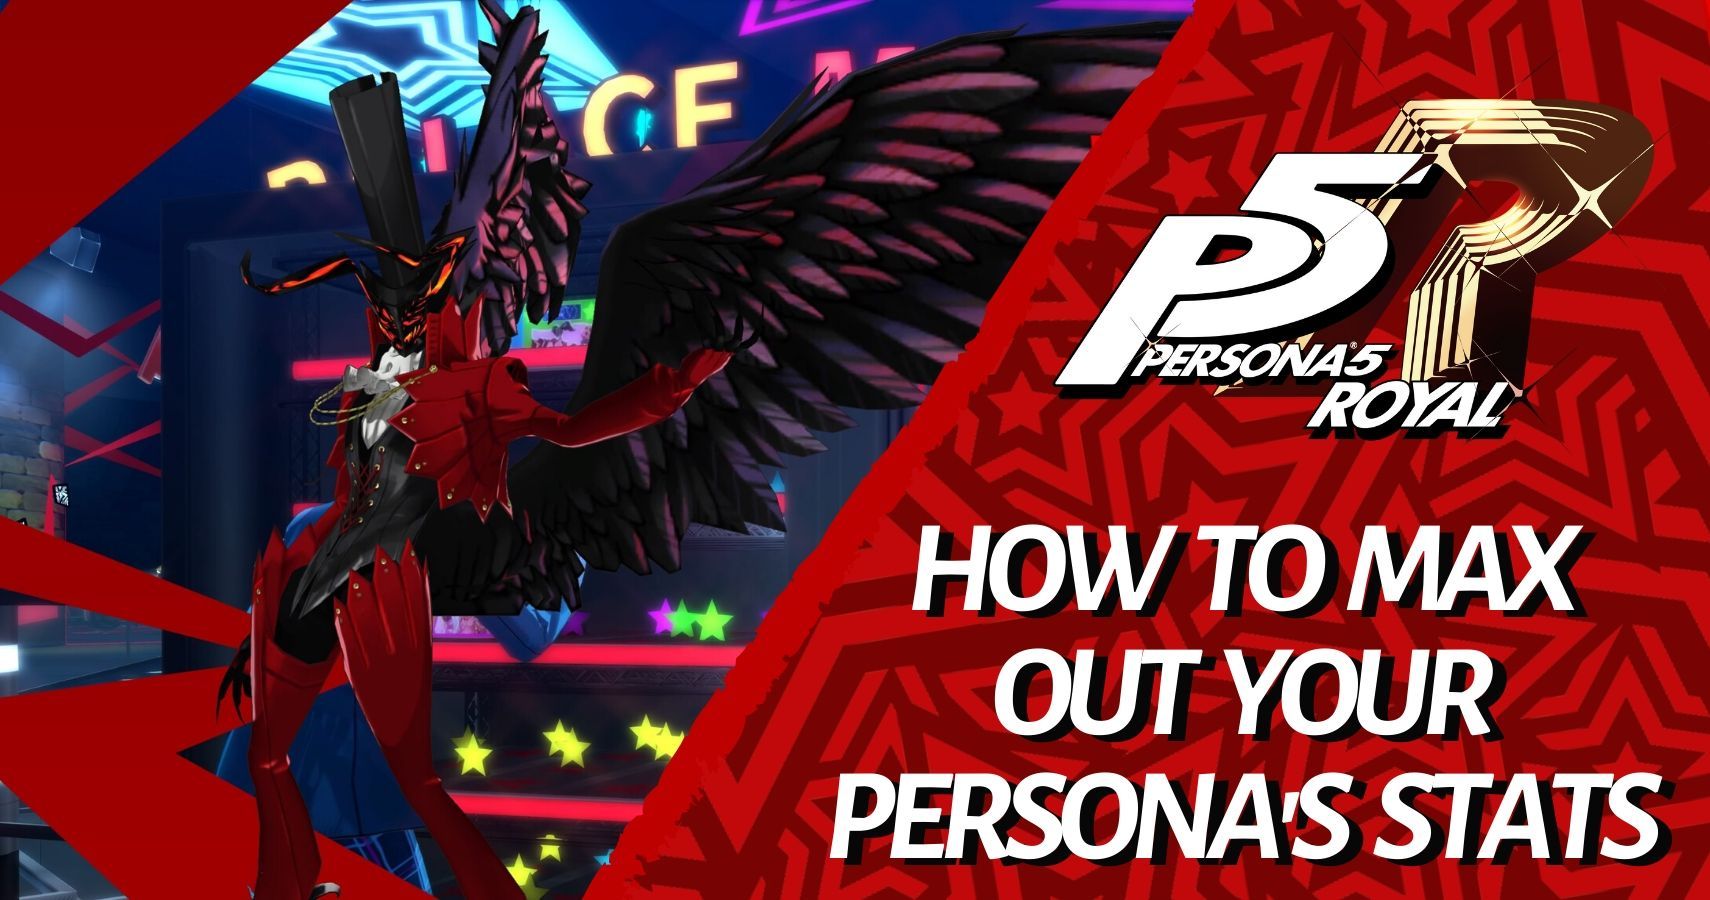 Persona 5 Royal How To Max Out Your Persona S Stats - roblox beyond max level